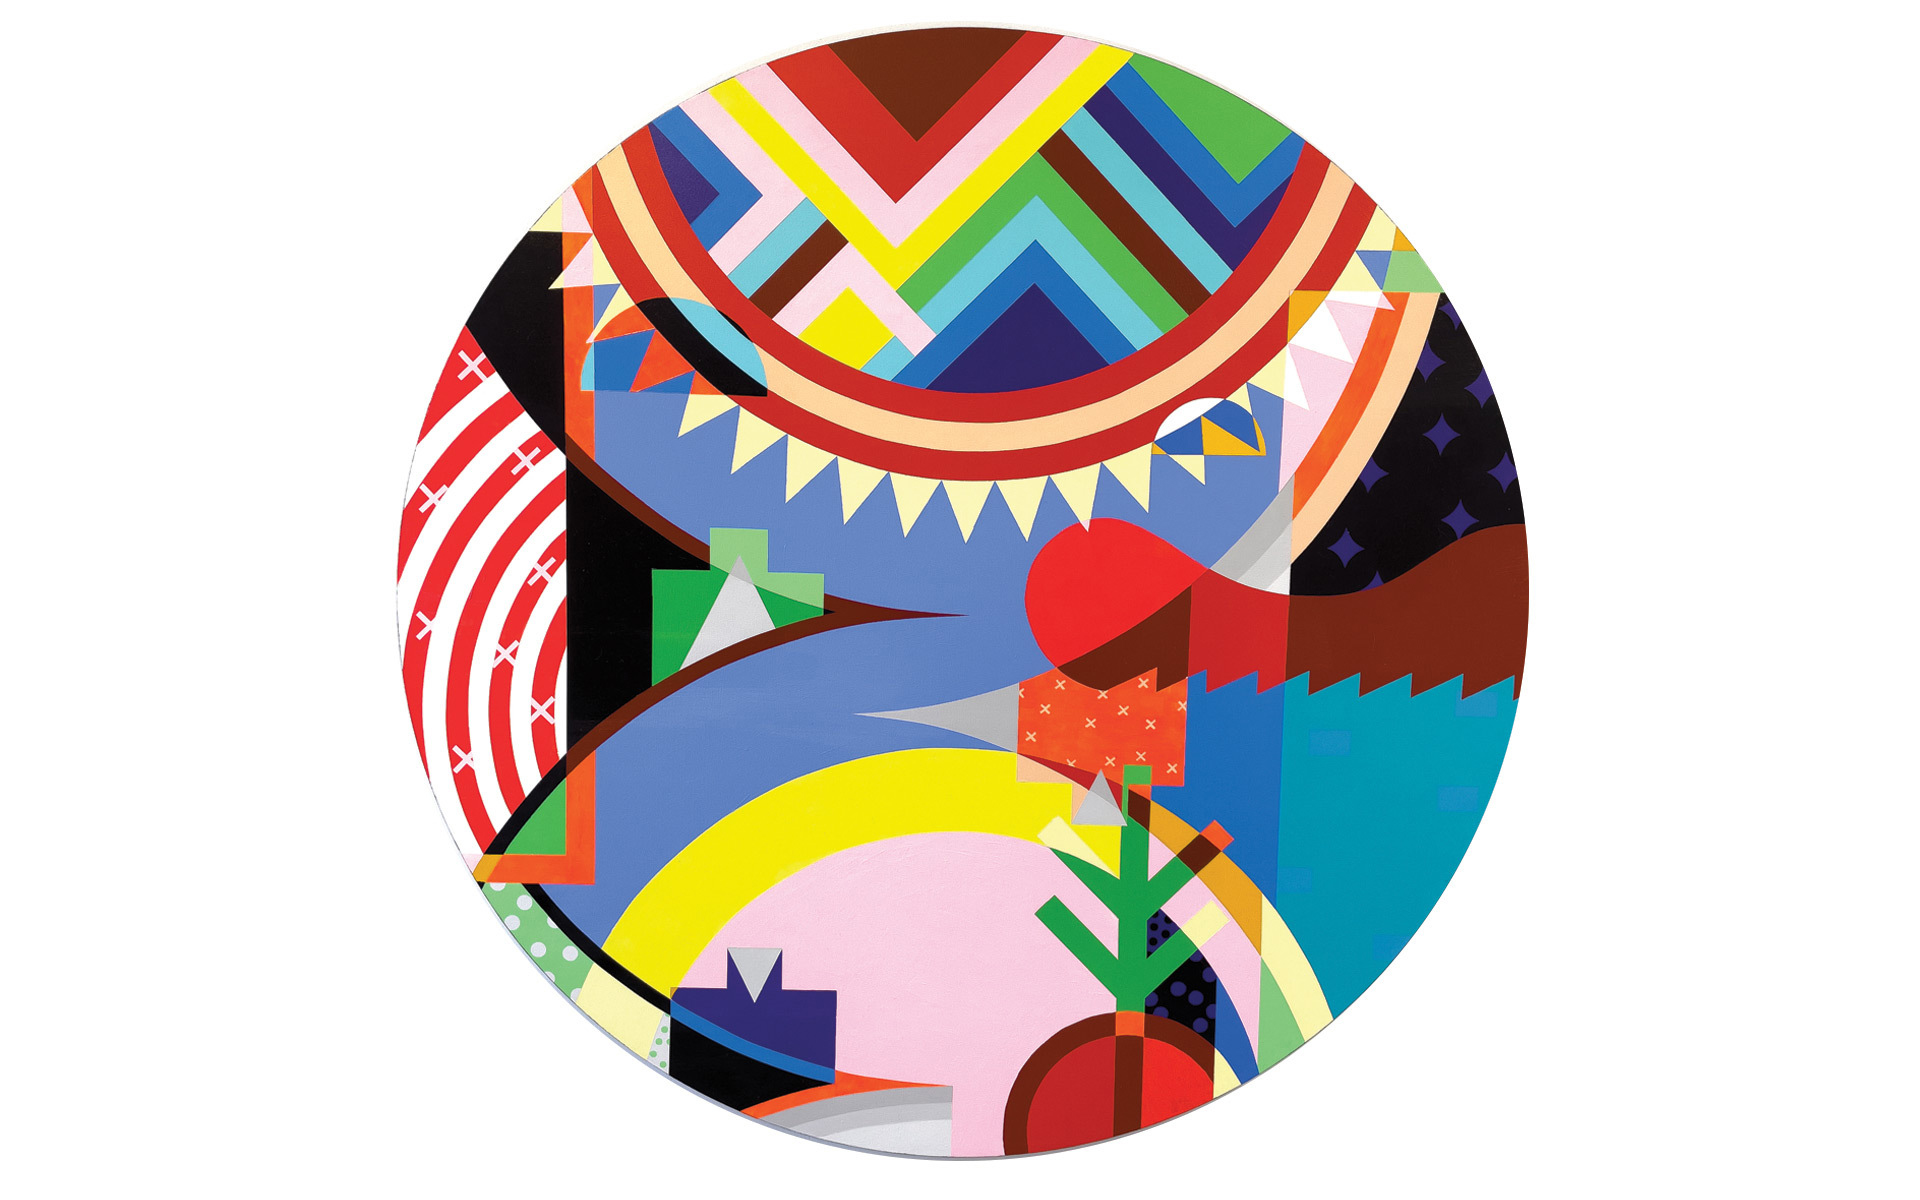 All Our Relations: Four Indigenous Lessons on Mindfulness—An abstract painting in a circle with many colors using Indigenous symbols and motifs.